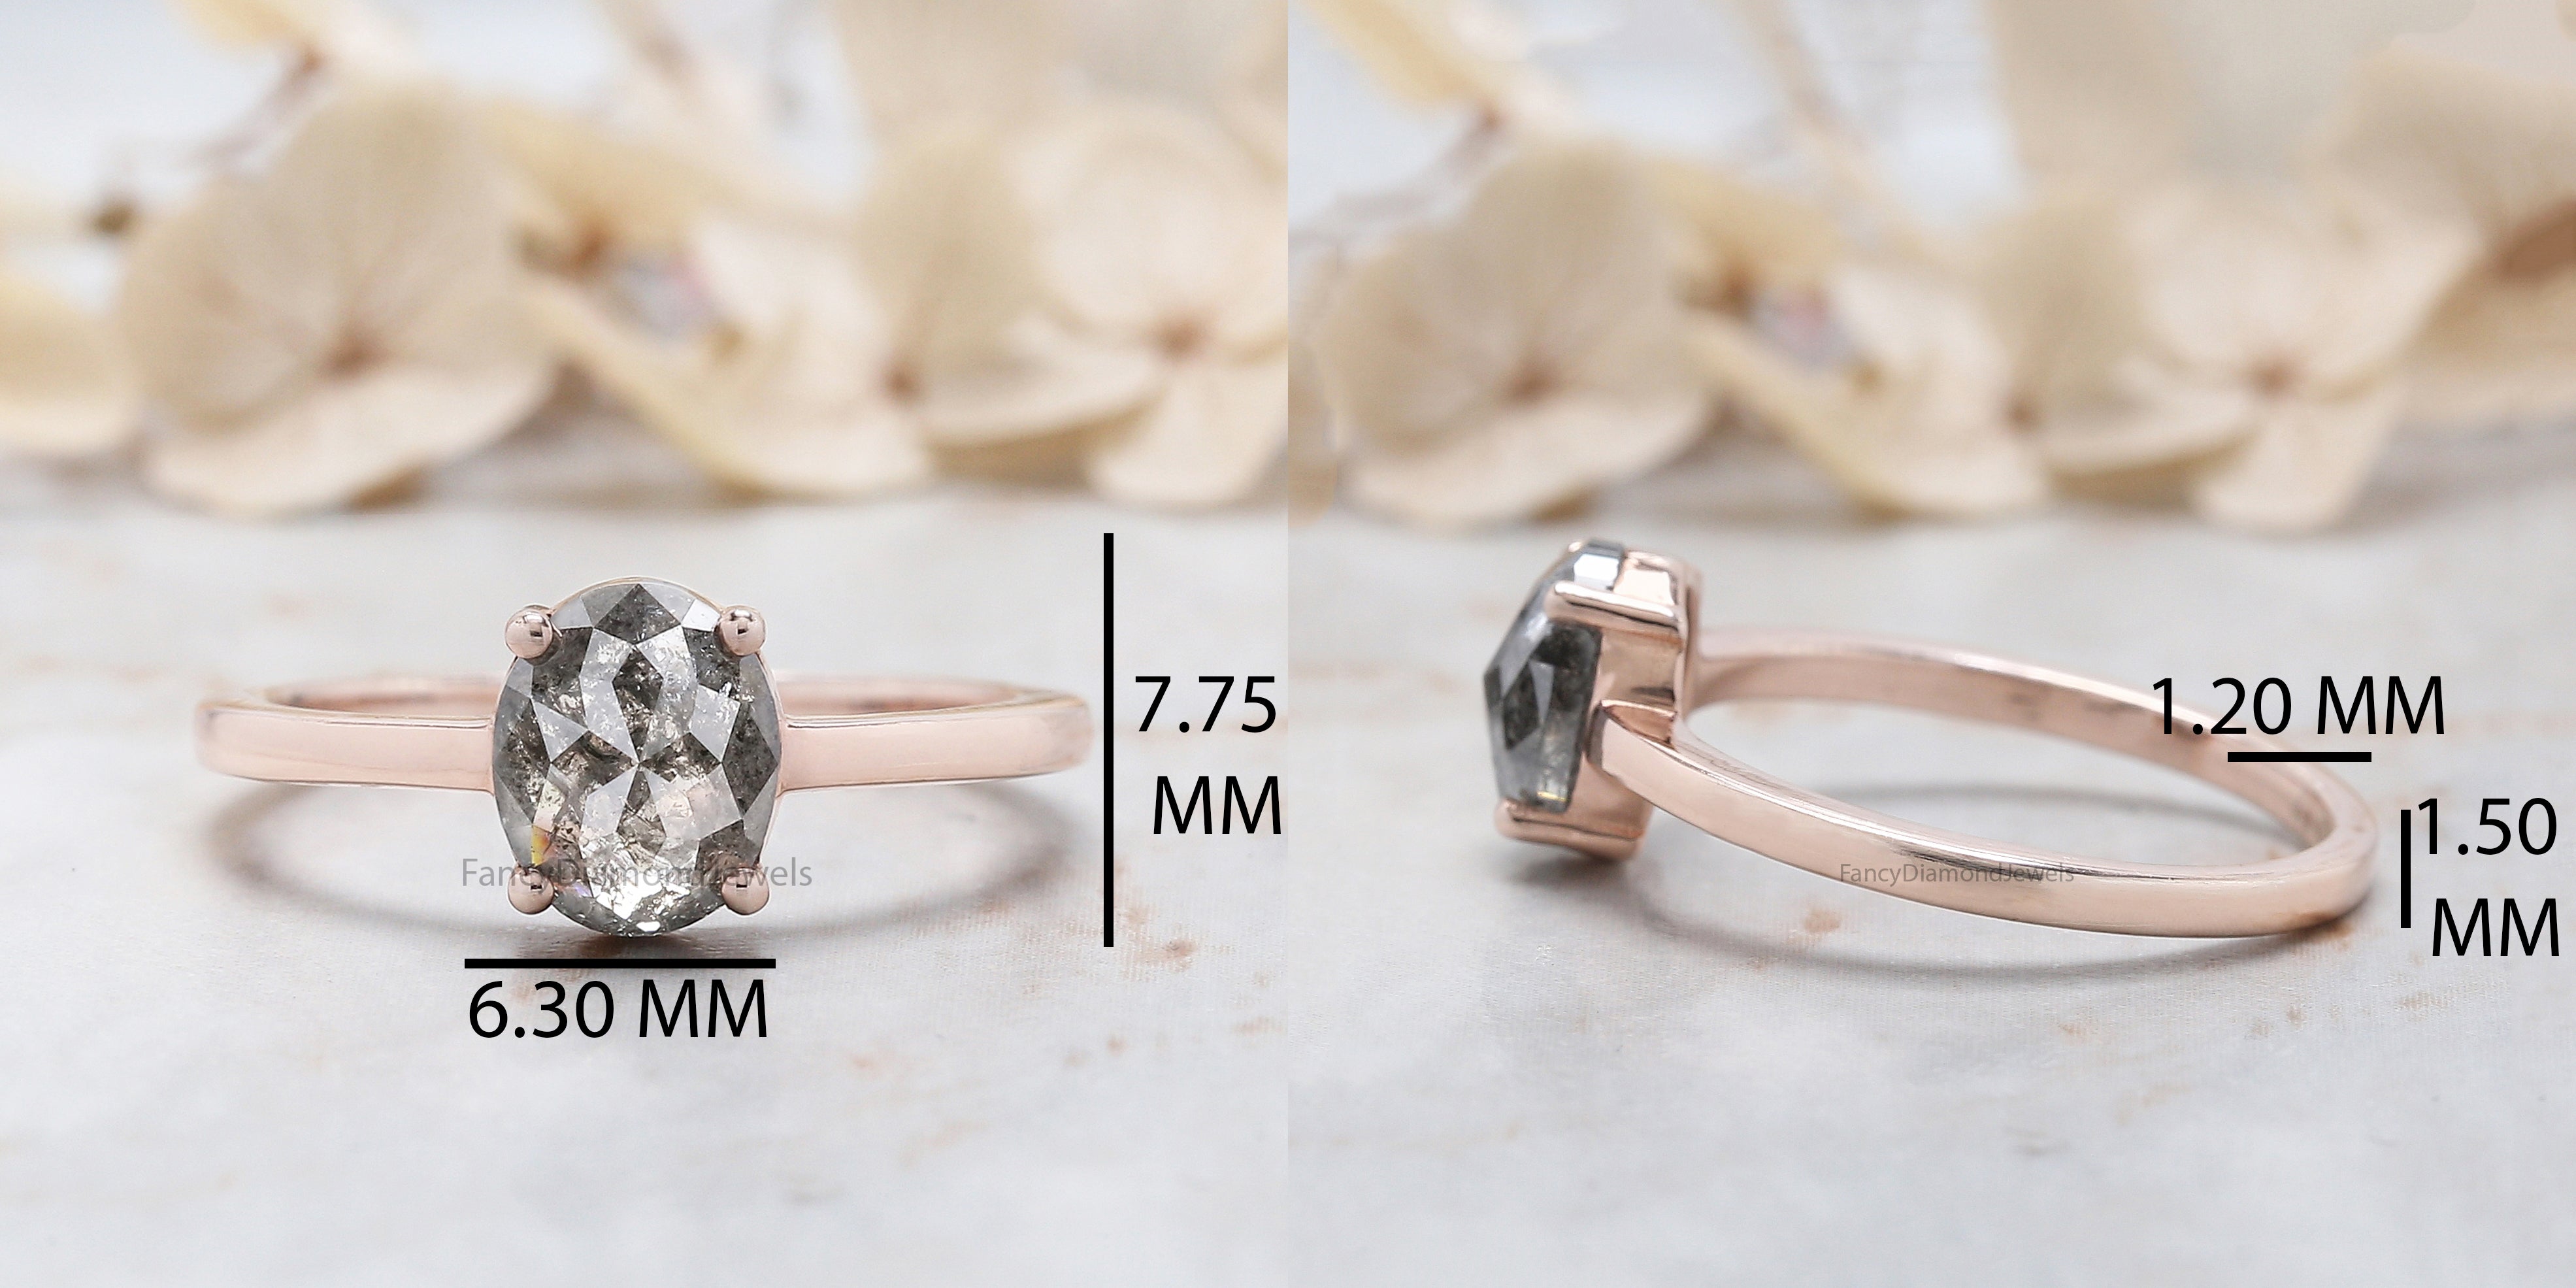 Oval Cut Salt And Pepper Diamond Ring 1.51 Ct 7.70 MM Oval Diamond Ring 14K Solid Rose Gold Silver Oval Engagement Ring Gift For Her QL1941